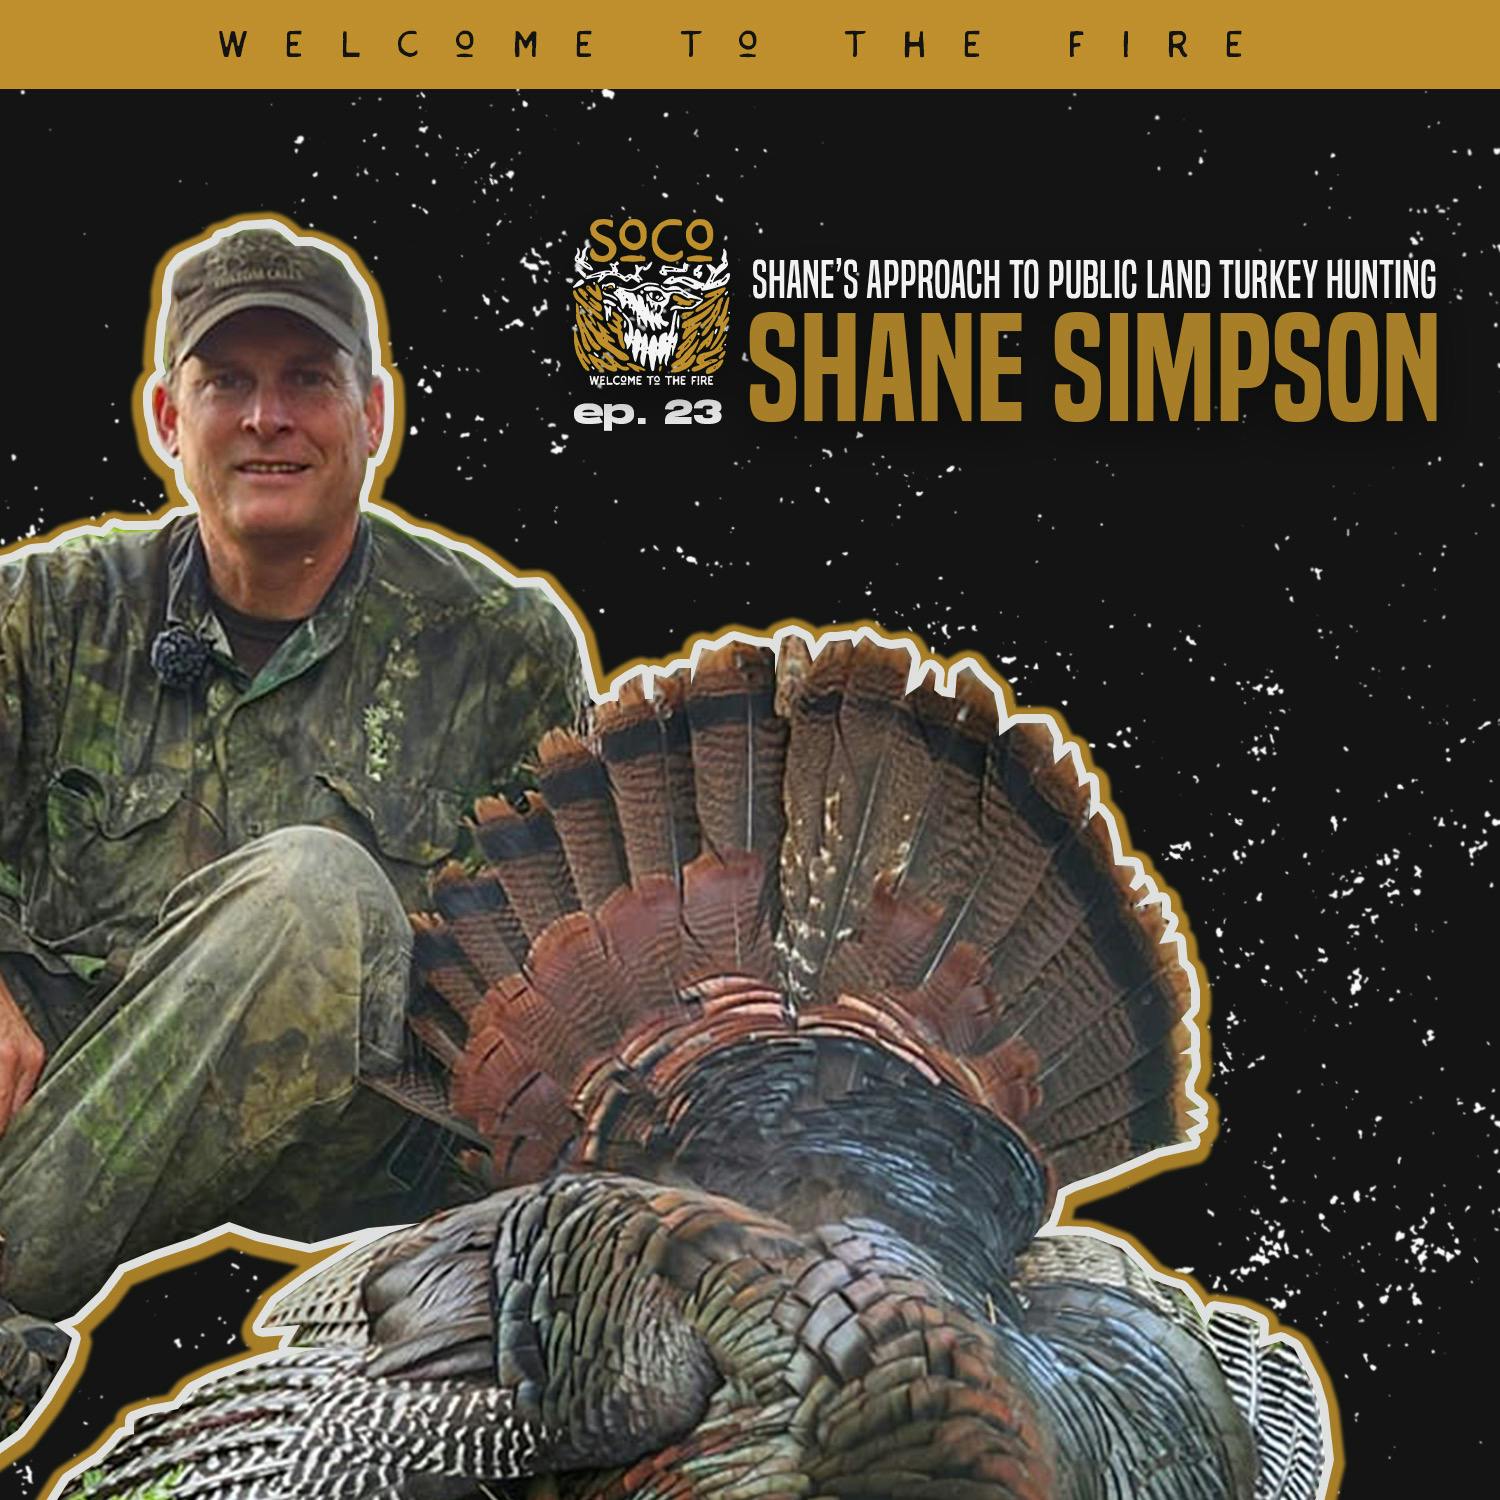 Ep. 23: Shane Simpson’s Approach to Public Land Turkey Hunting